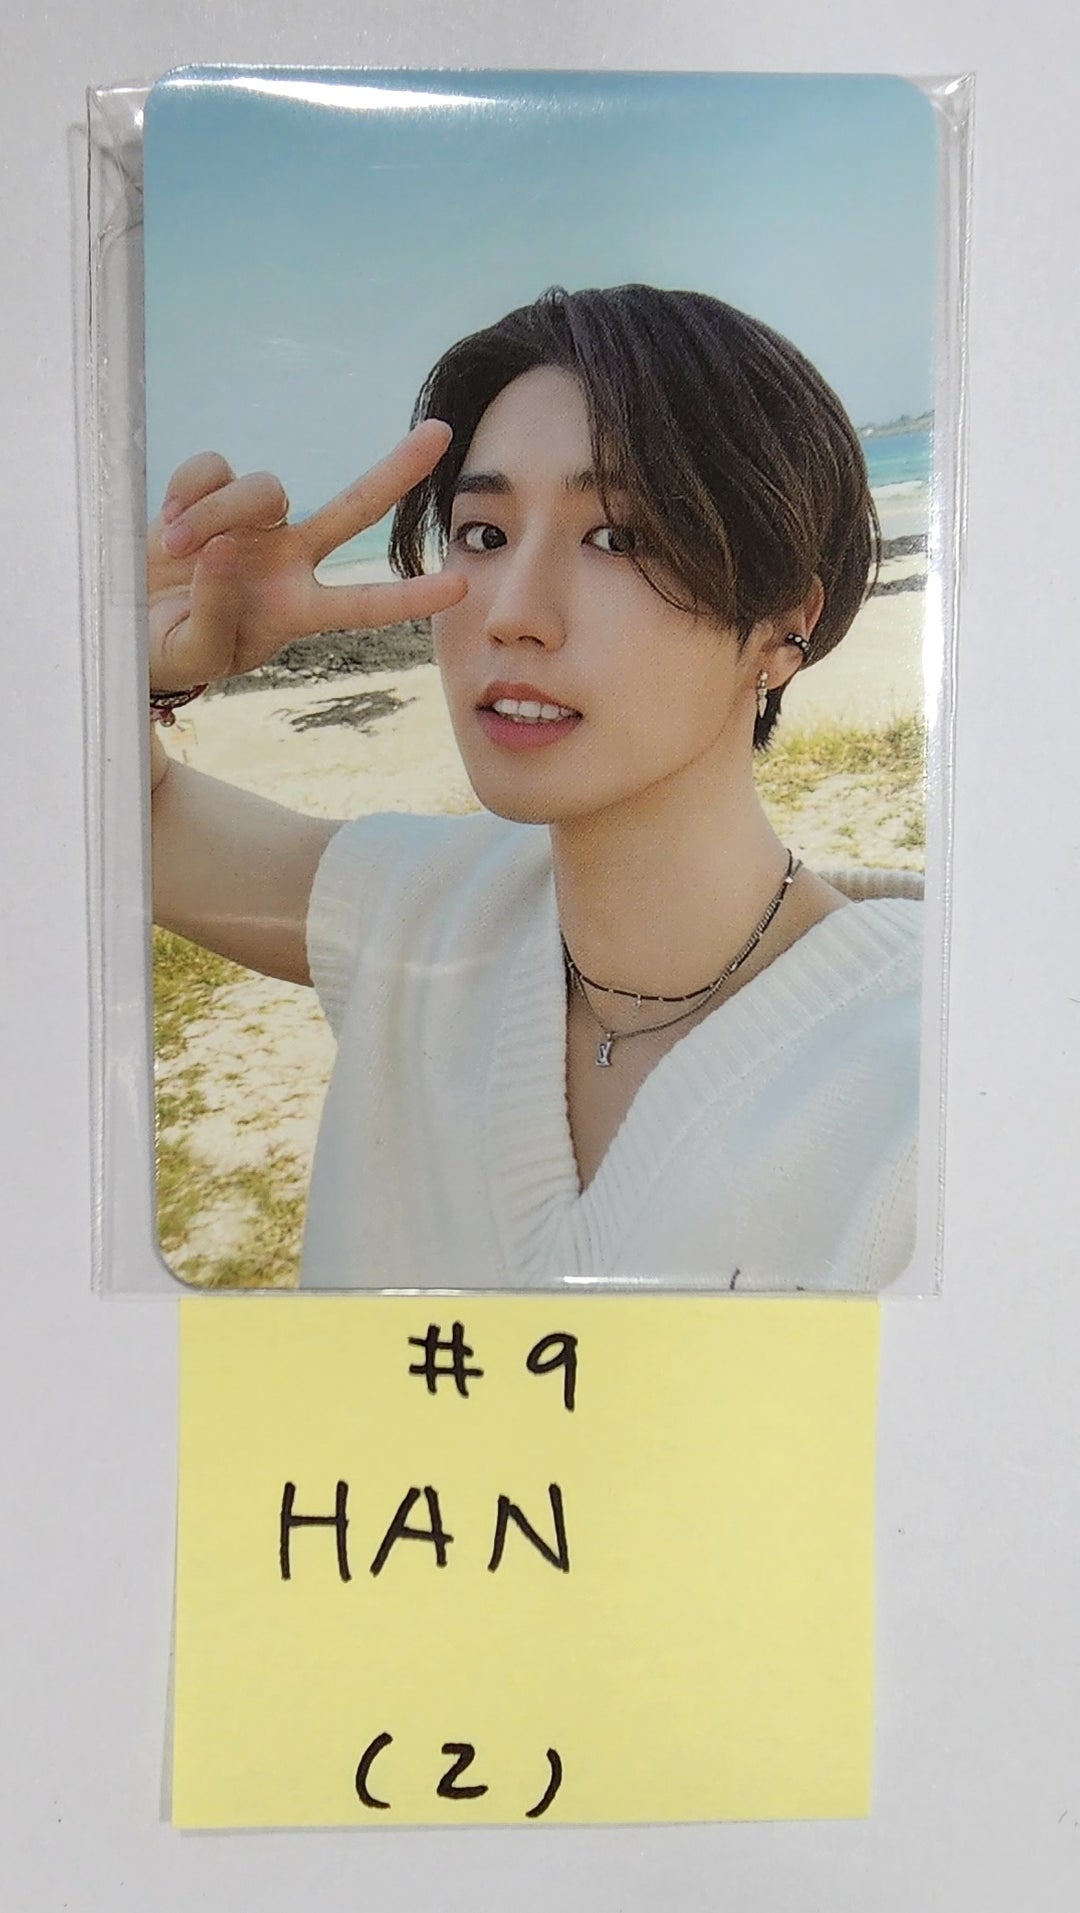 Stray Kids "Stay in STAY" in JEJU EXHIBITON - JYP Shop SKZ Official MD Event Photocard Round 2